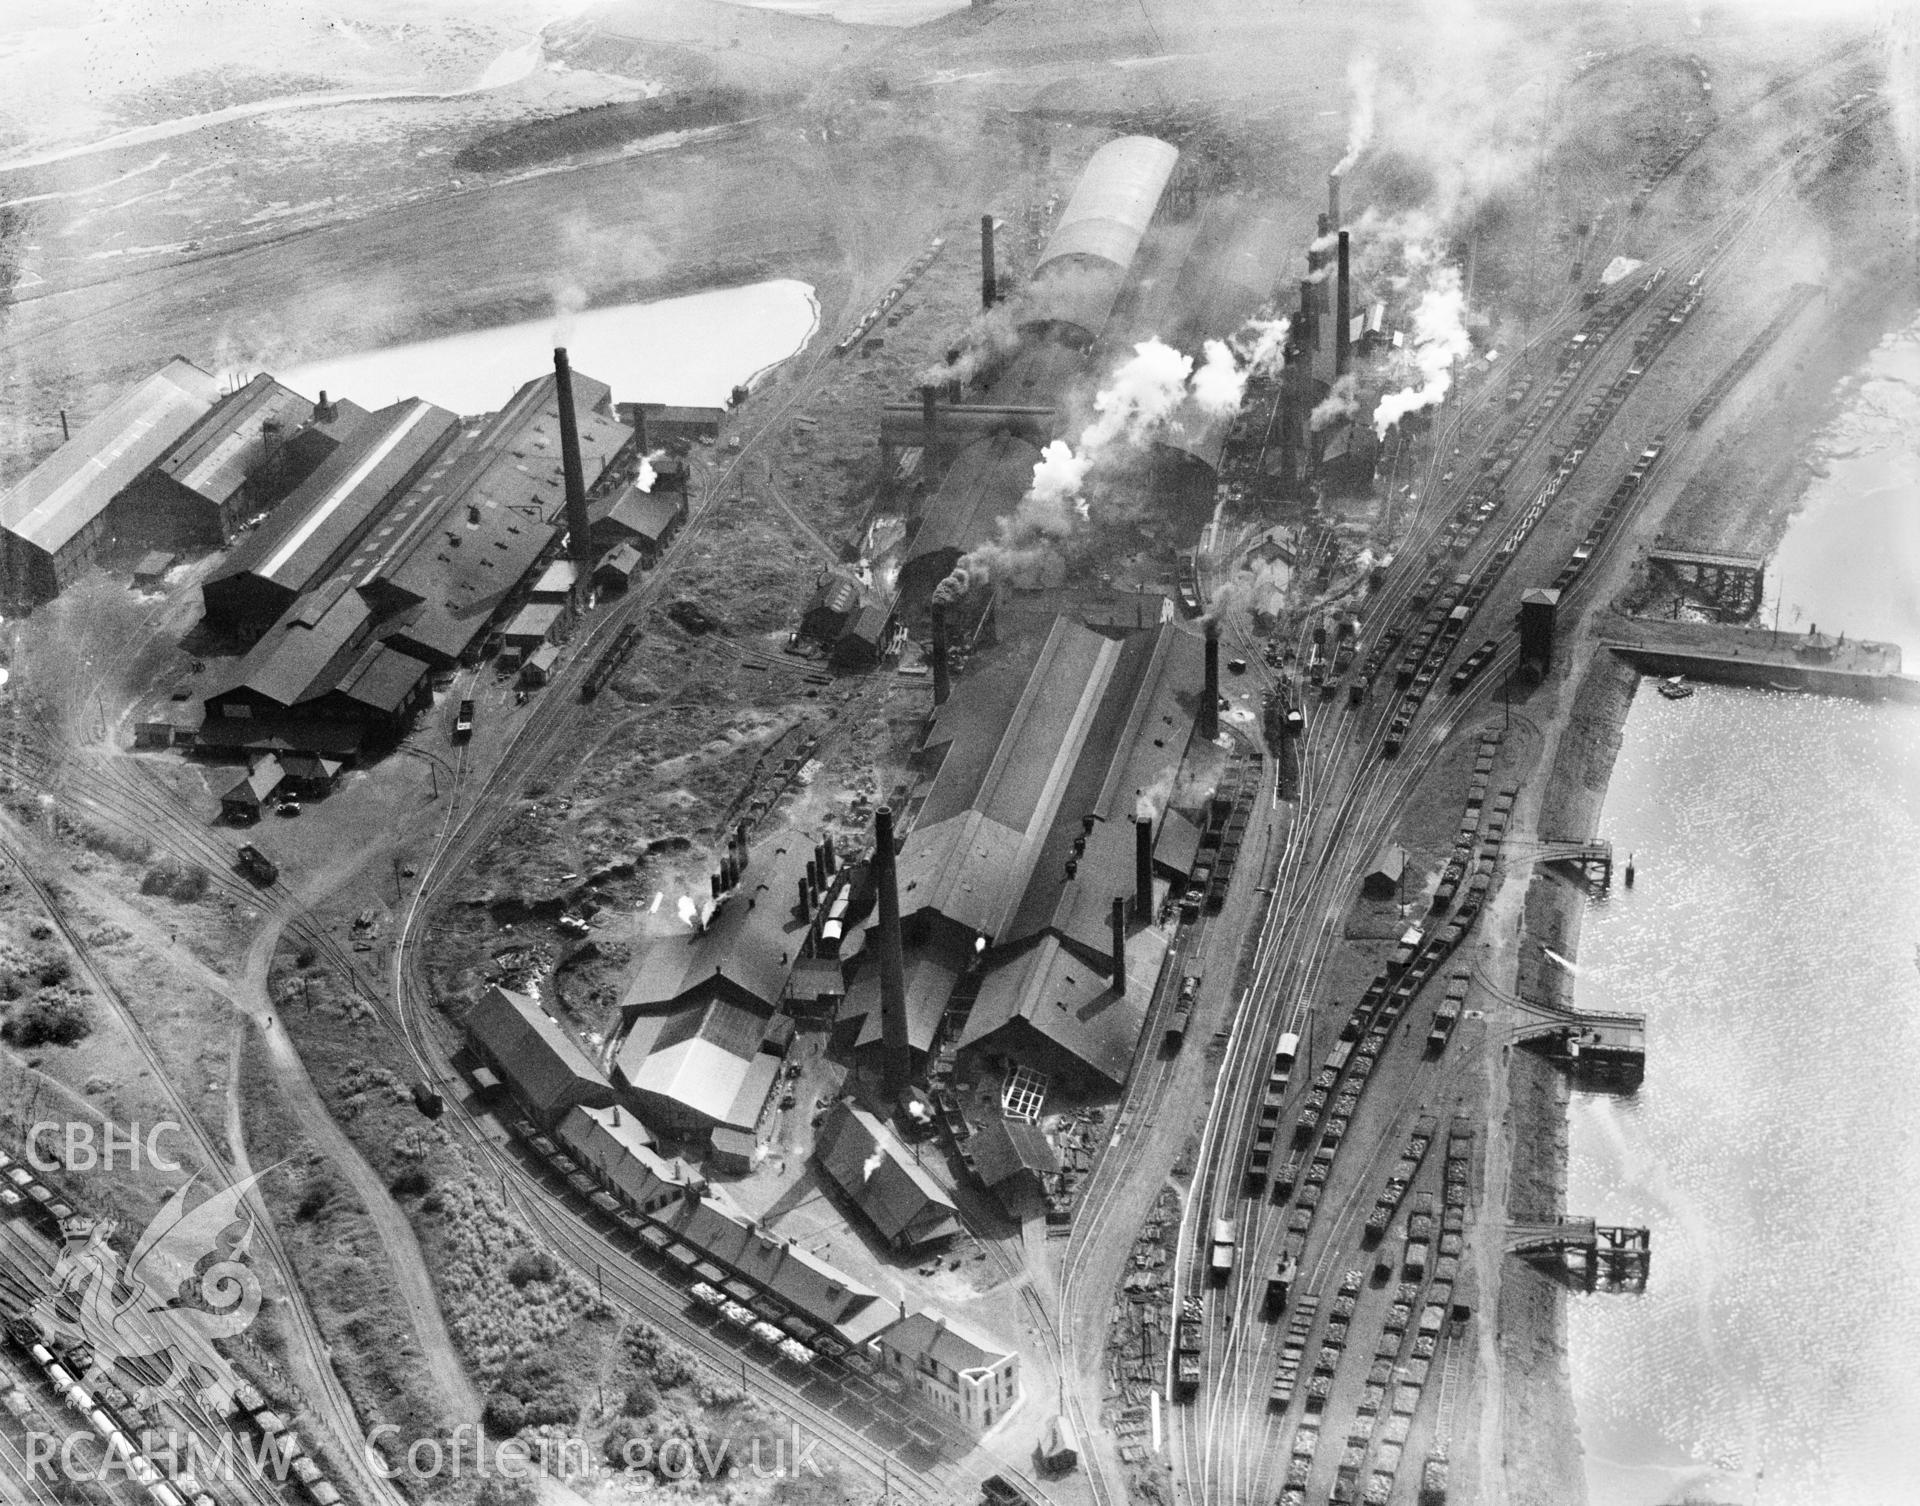 View of Baglan Bay tinplate works, Whitford and Albion works, Briton Ferry from the north, oblique aerial view. 5?x4? black and white glass plate negative.